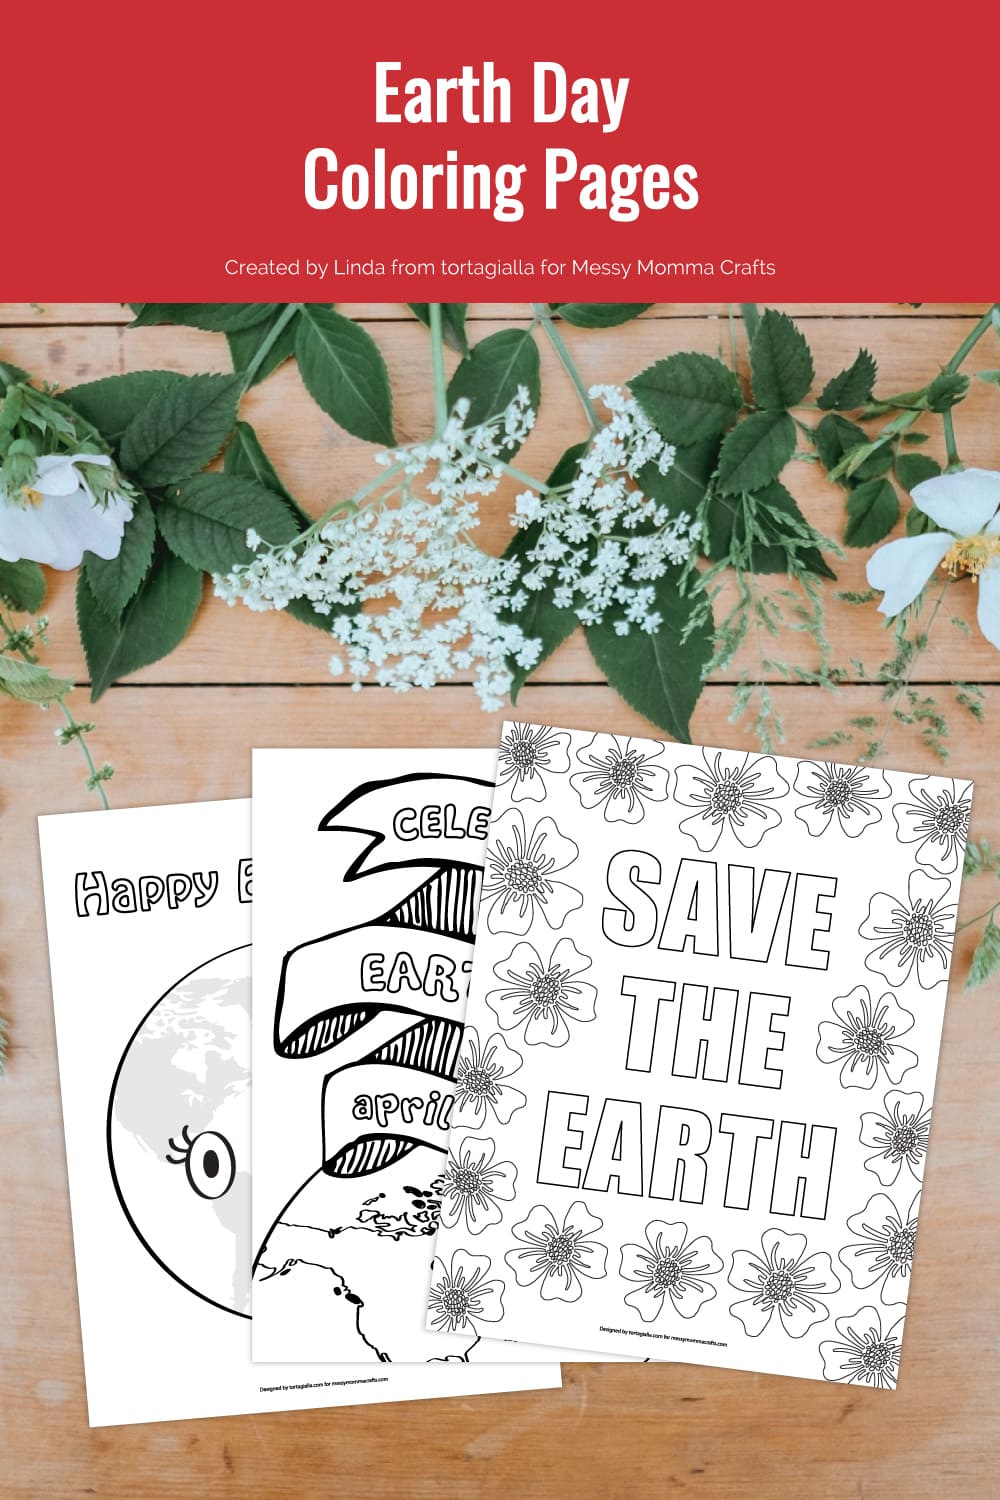 Preview of three earth day coloring page illustrations on top of wooden background with green foilage and whit eflowers on top border.